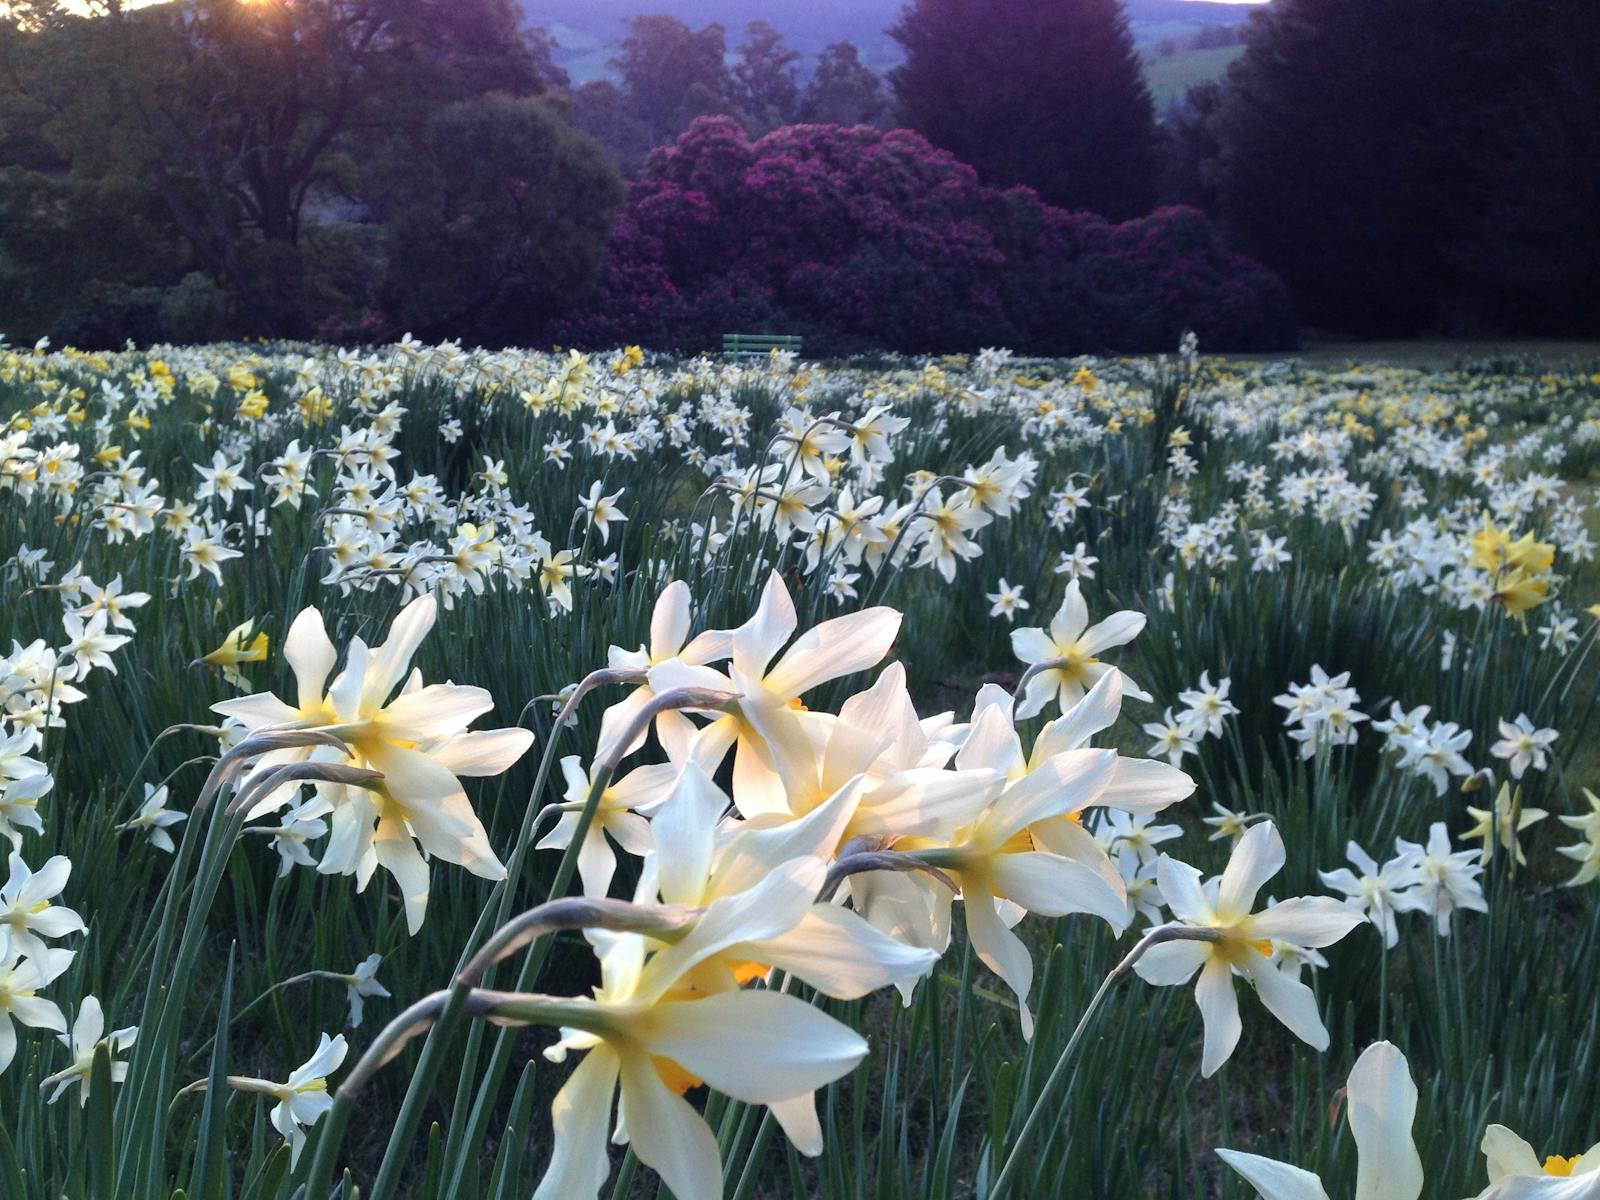 Daffodils are a feature in August and September as they bloom across large swathes of the farm